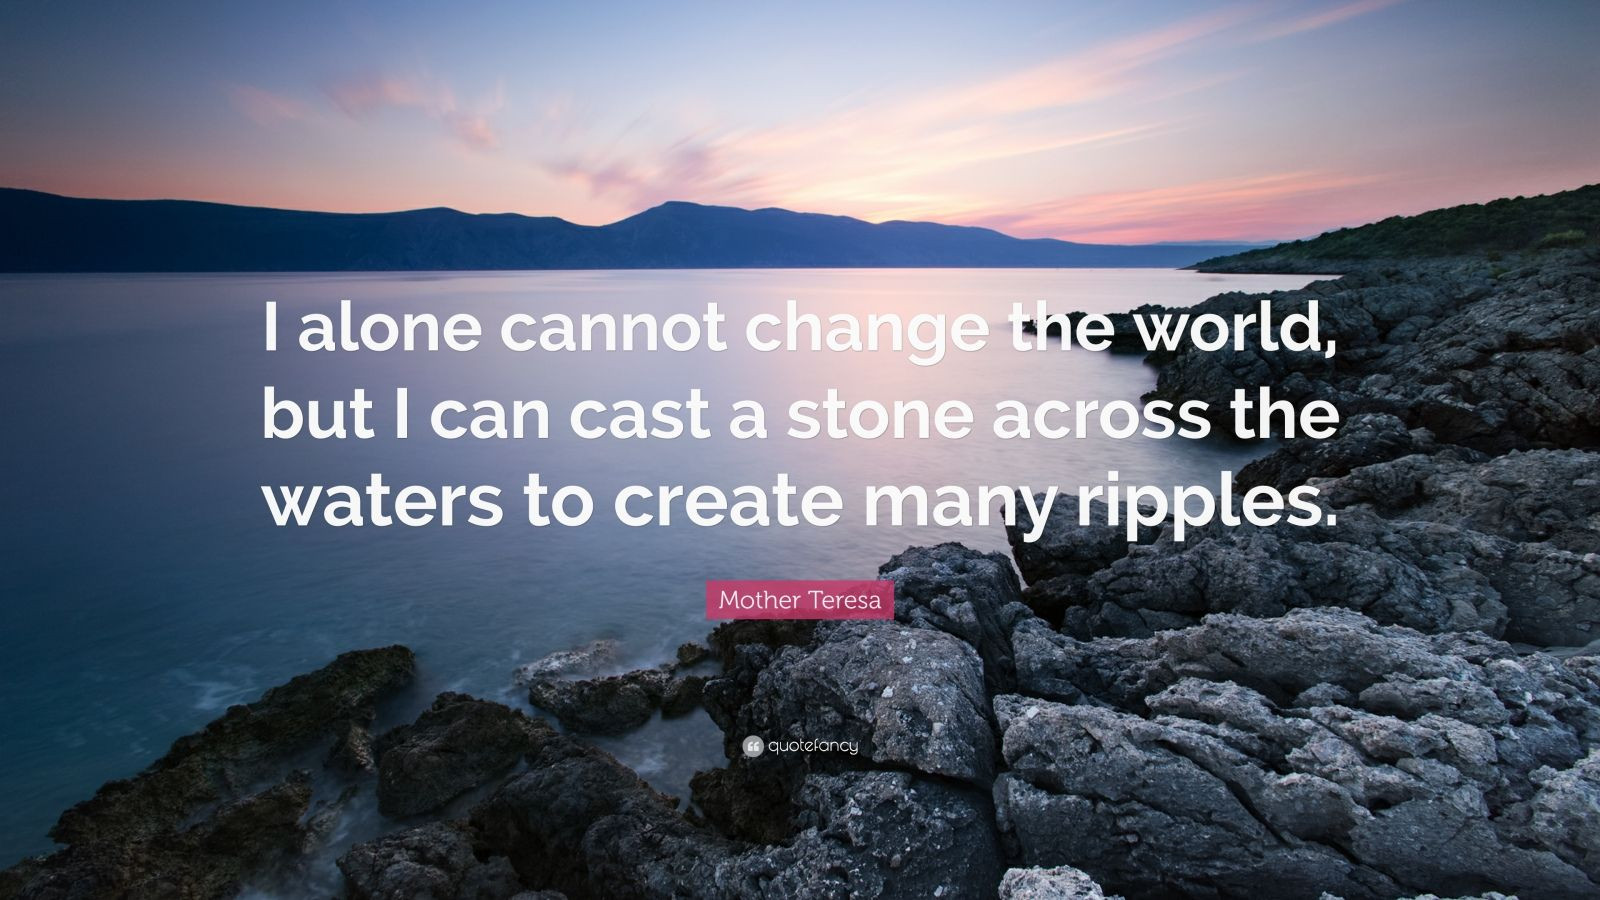 Mother Teresa Ripple Quote
 Mother Teresa Quote “I alone cannot change the world but